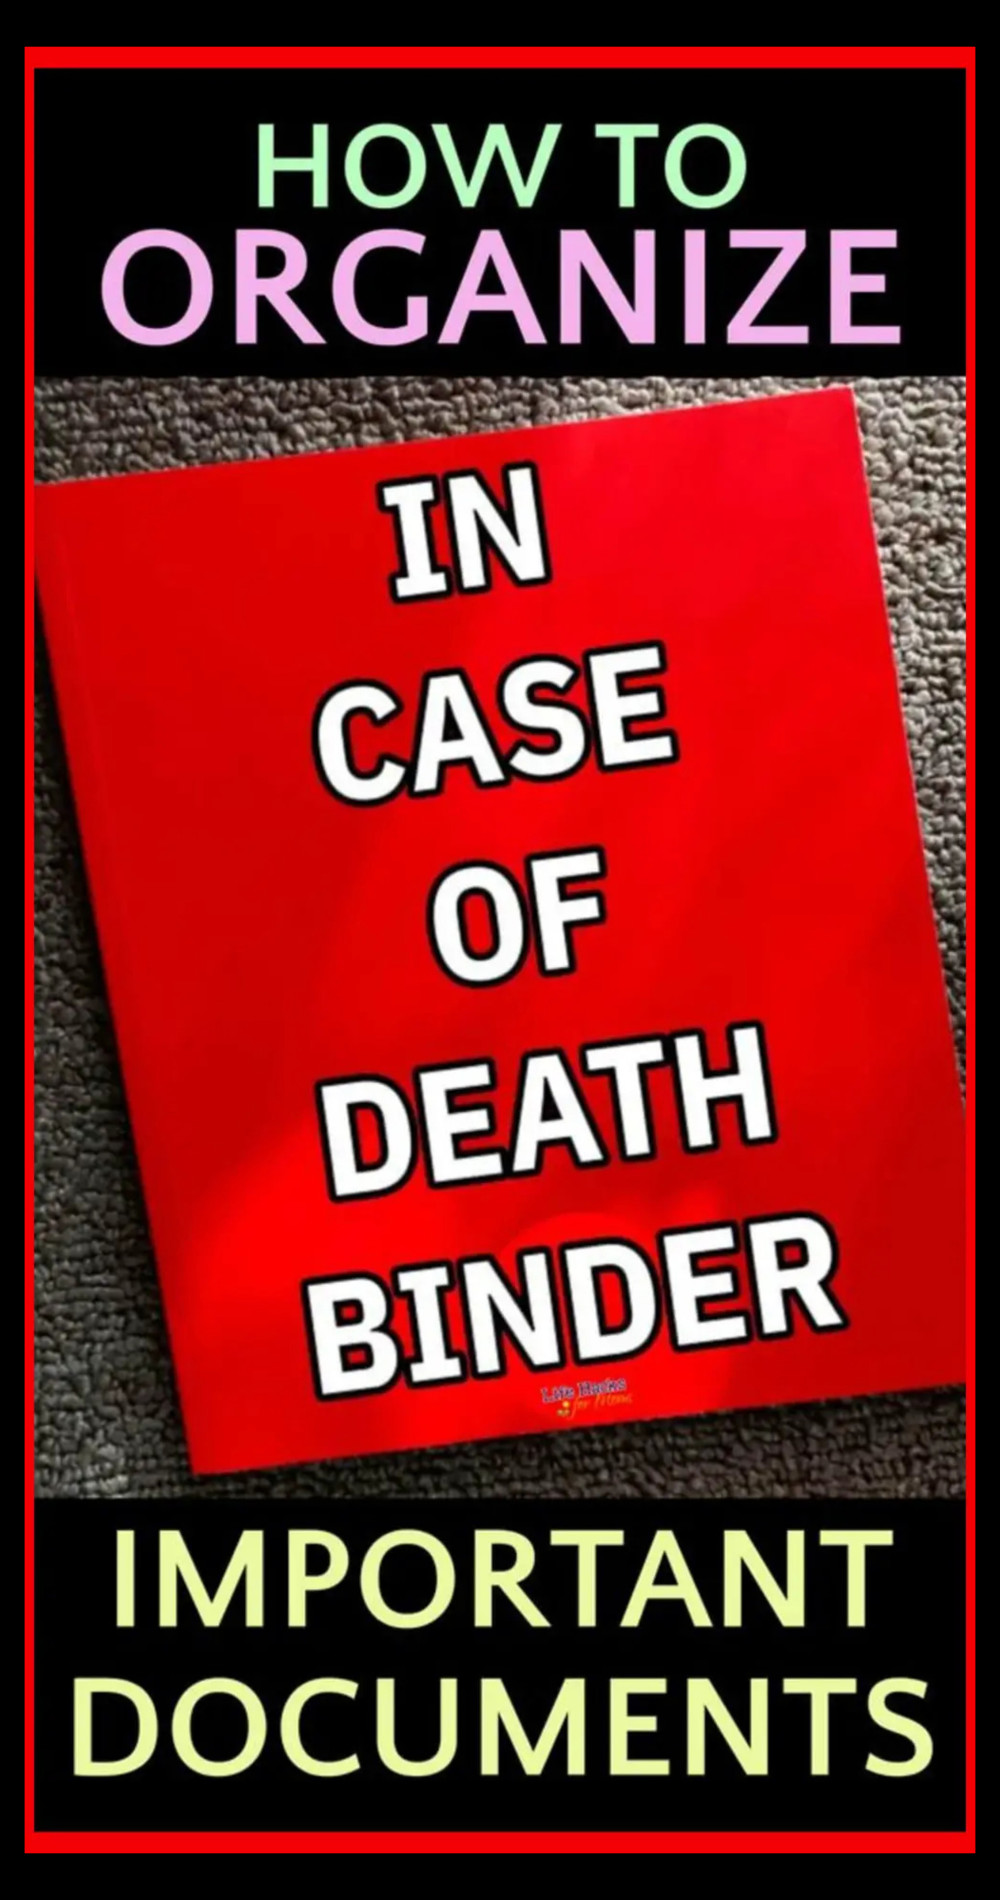 How to organize important documents in a binder in case you die or event of emergency